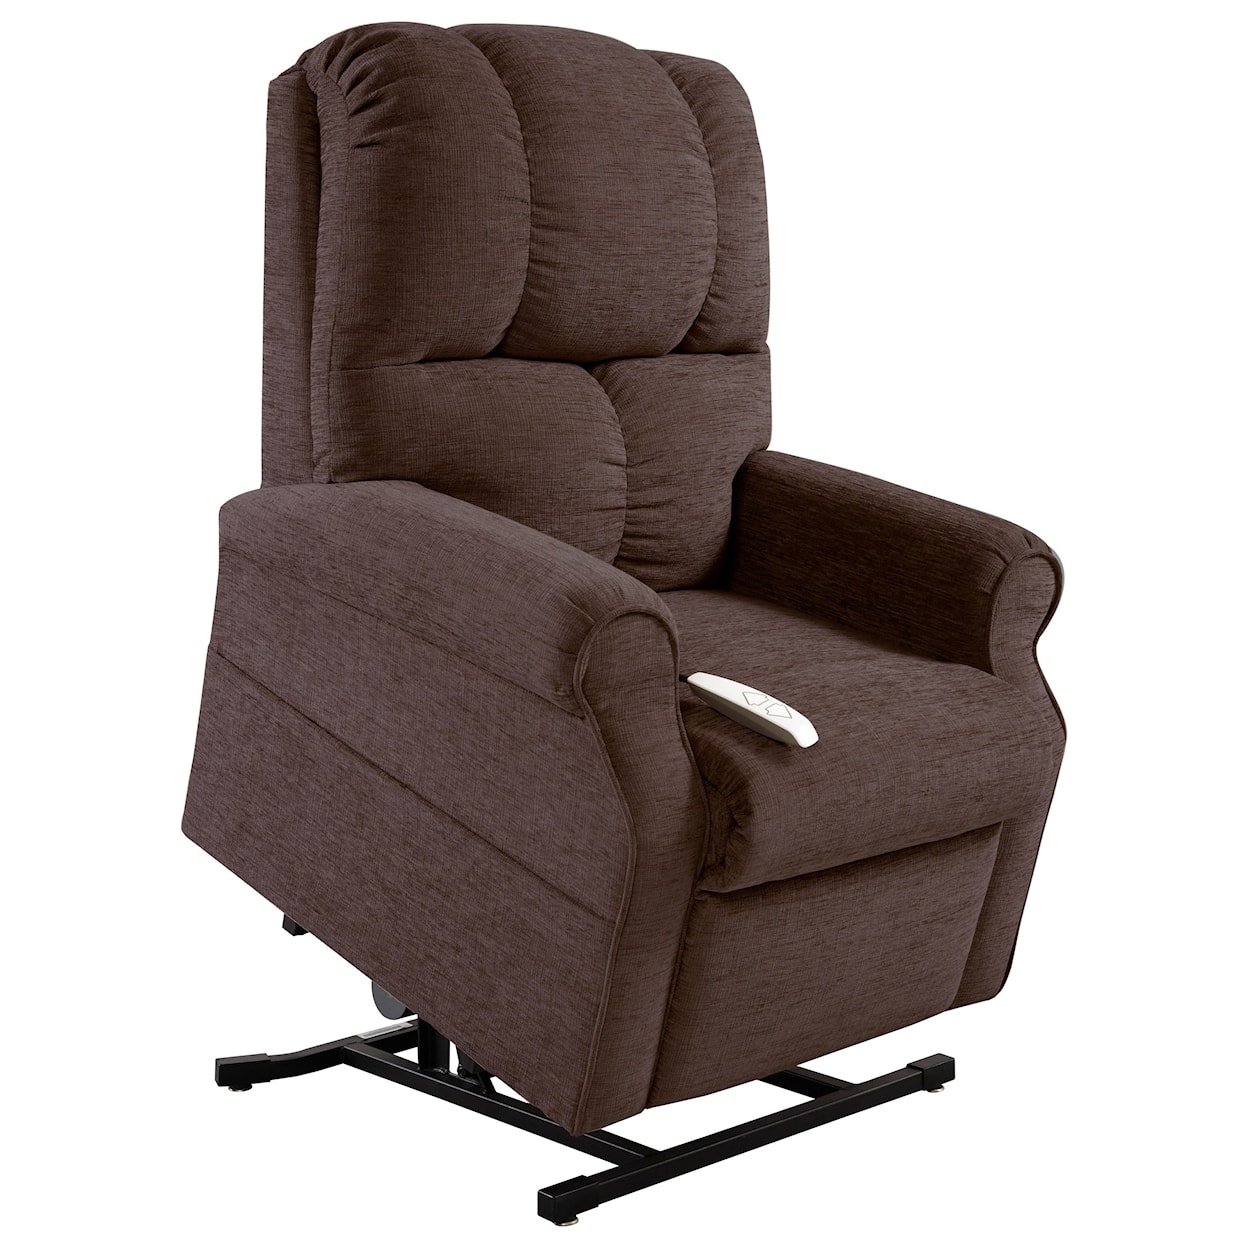 Windermere Motion Lift Chairs Celestial Chaise Lounger